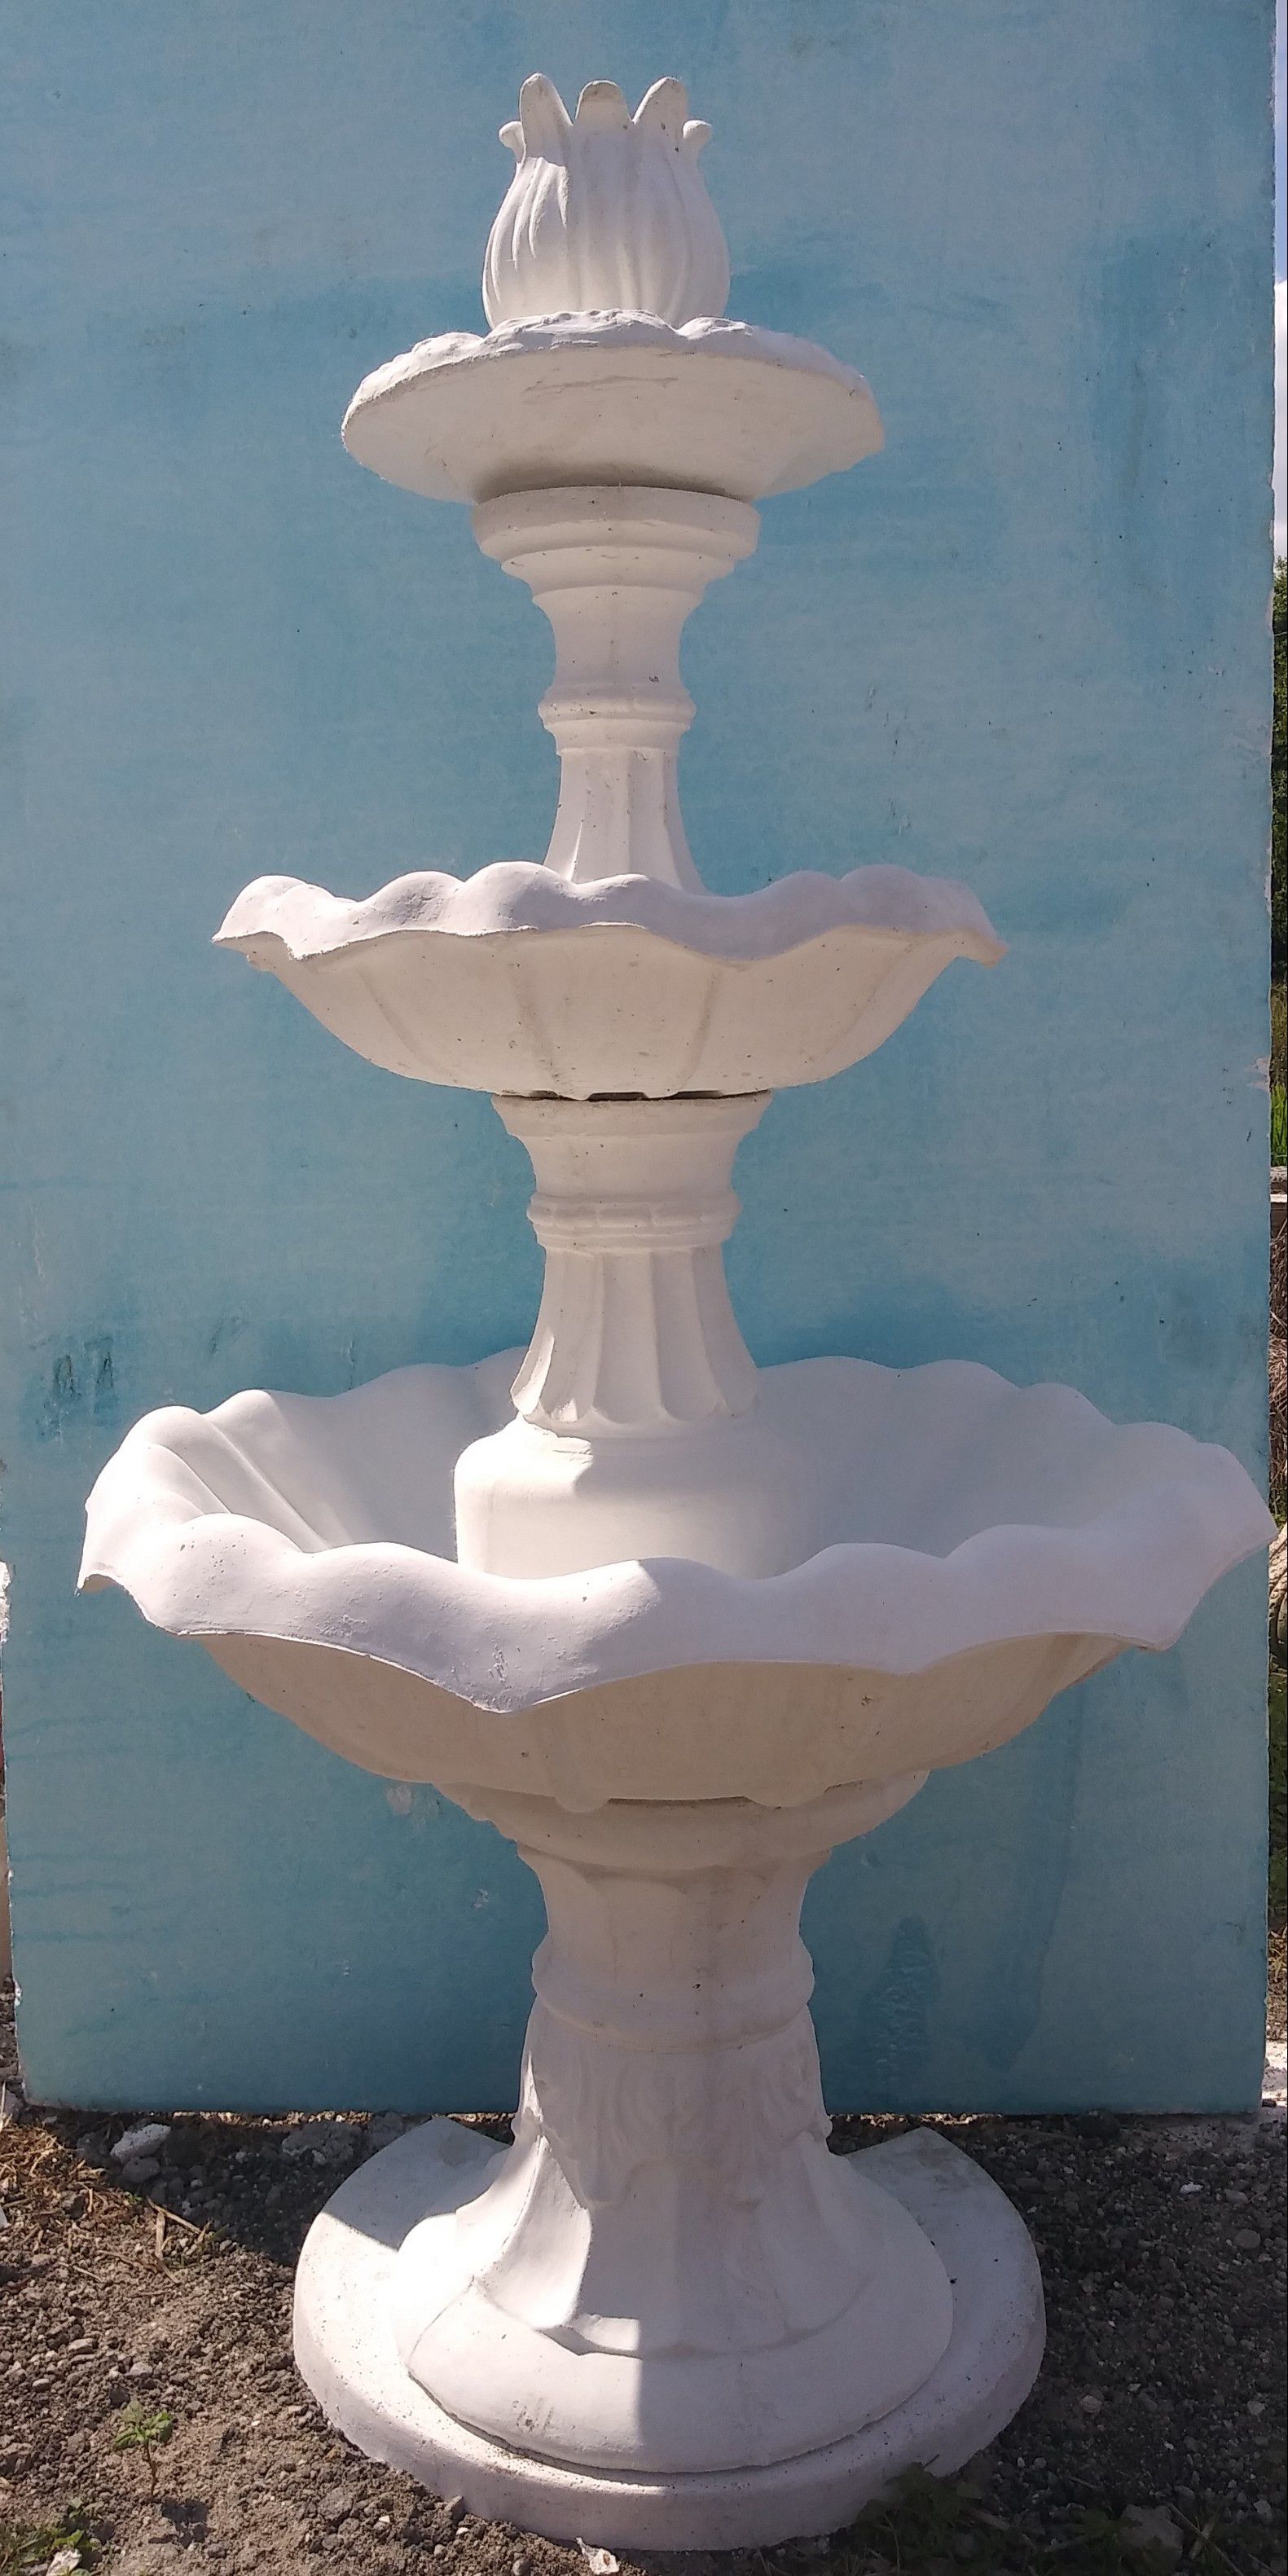 3 Tiers Water fountain.